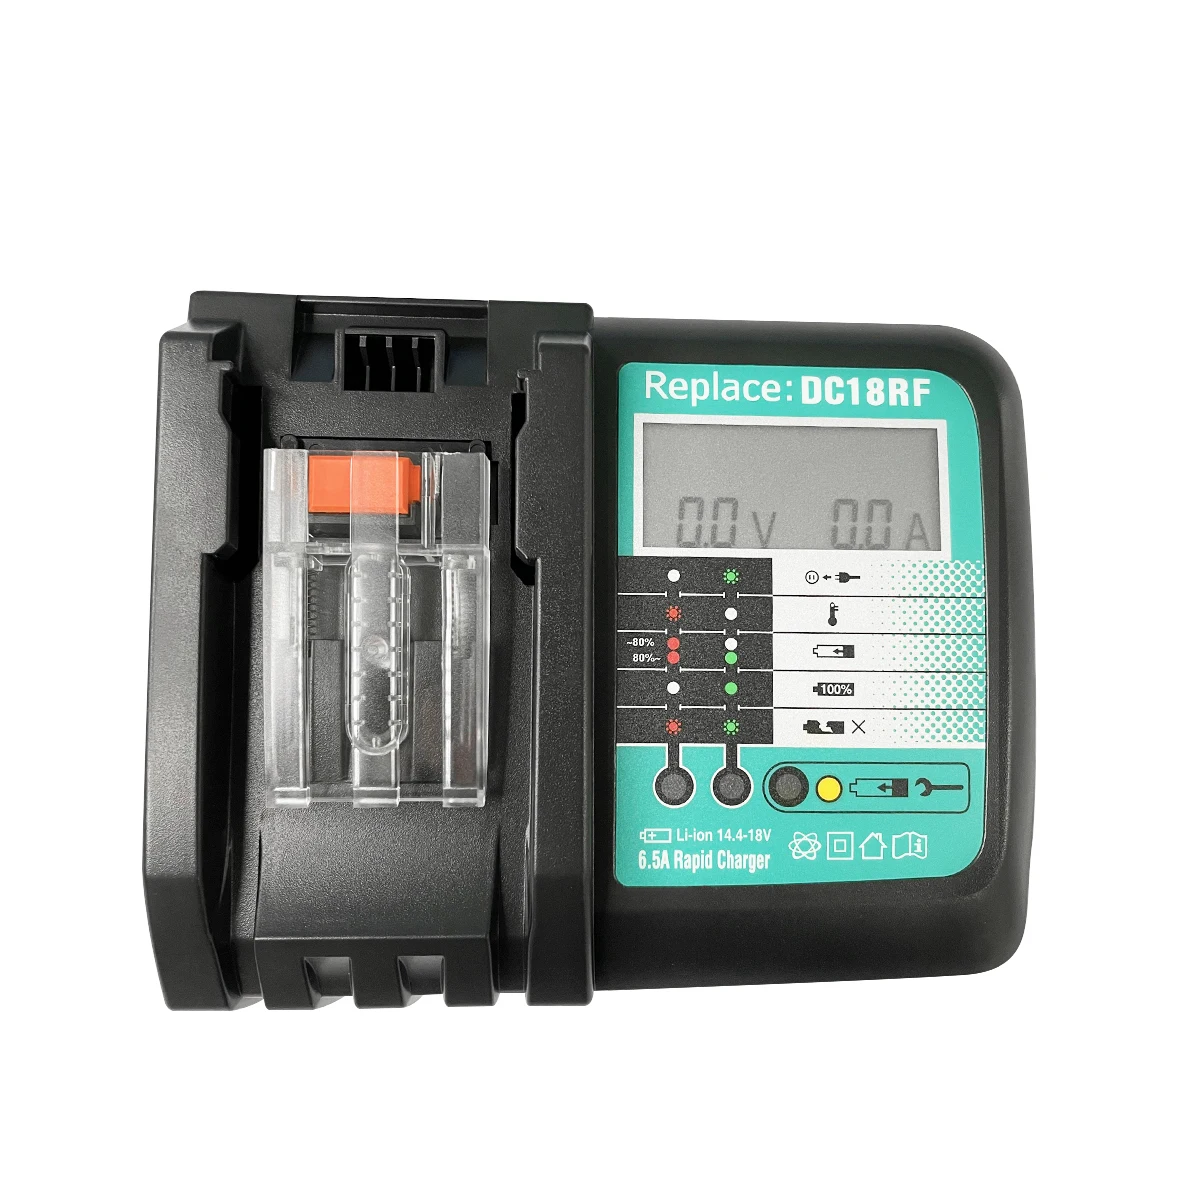 

6.5A DC18RF Makita Battery Charger with LED Screen for Makita 18v Battery Charger BL1830 BL1430 BL1850 BL1860 DC18RC DC18RA, Black